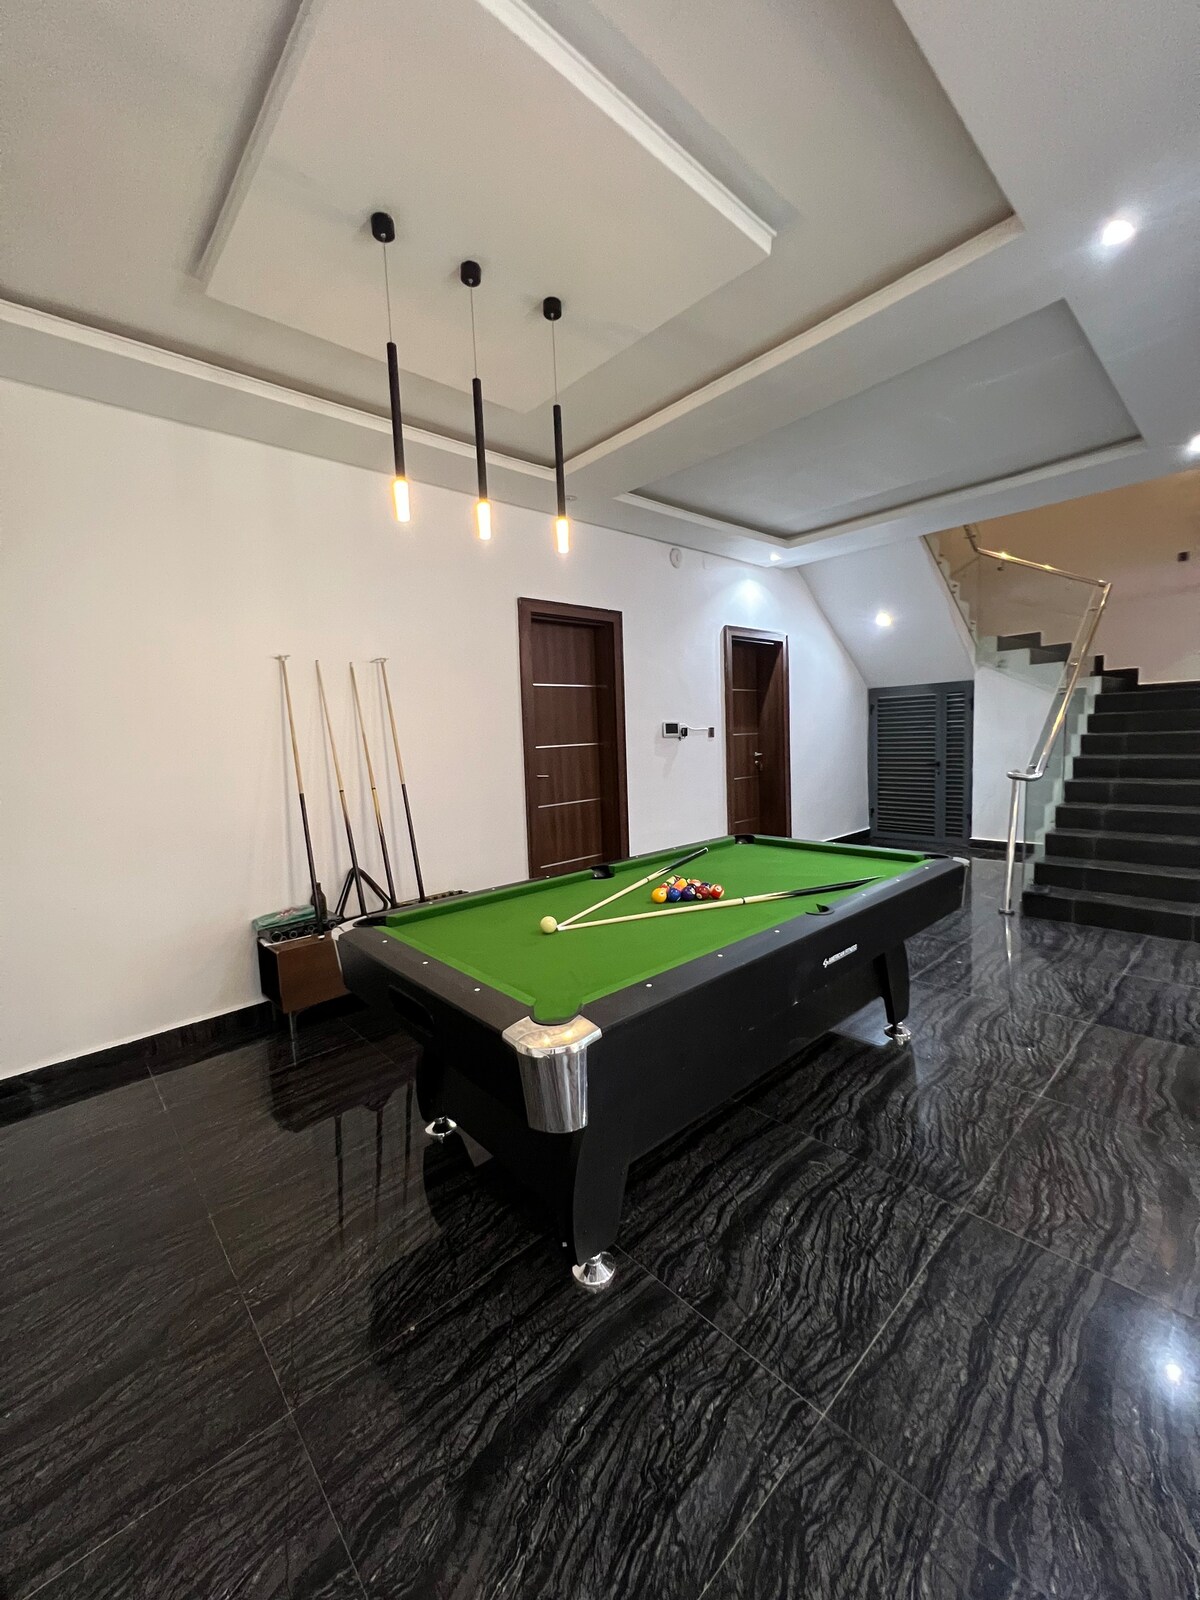 Spacious 3 bedroom duplex with a pool table